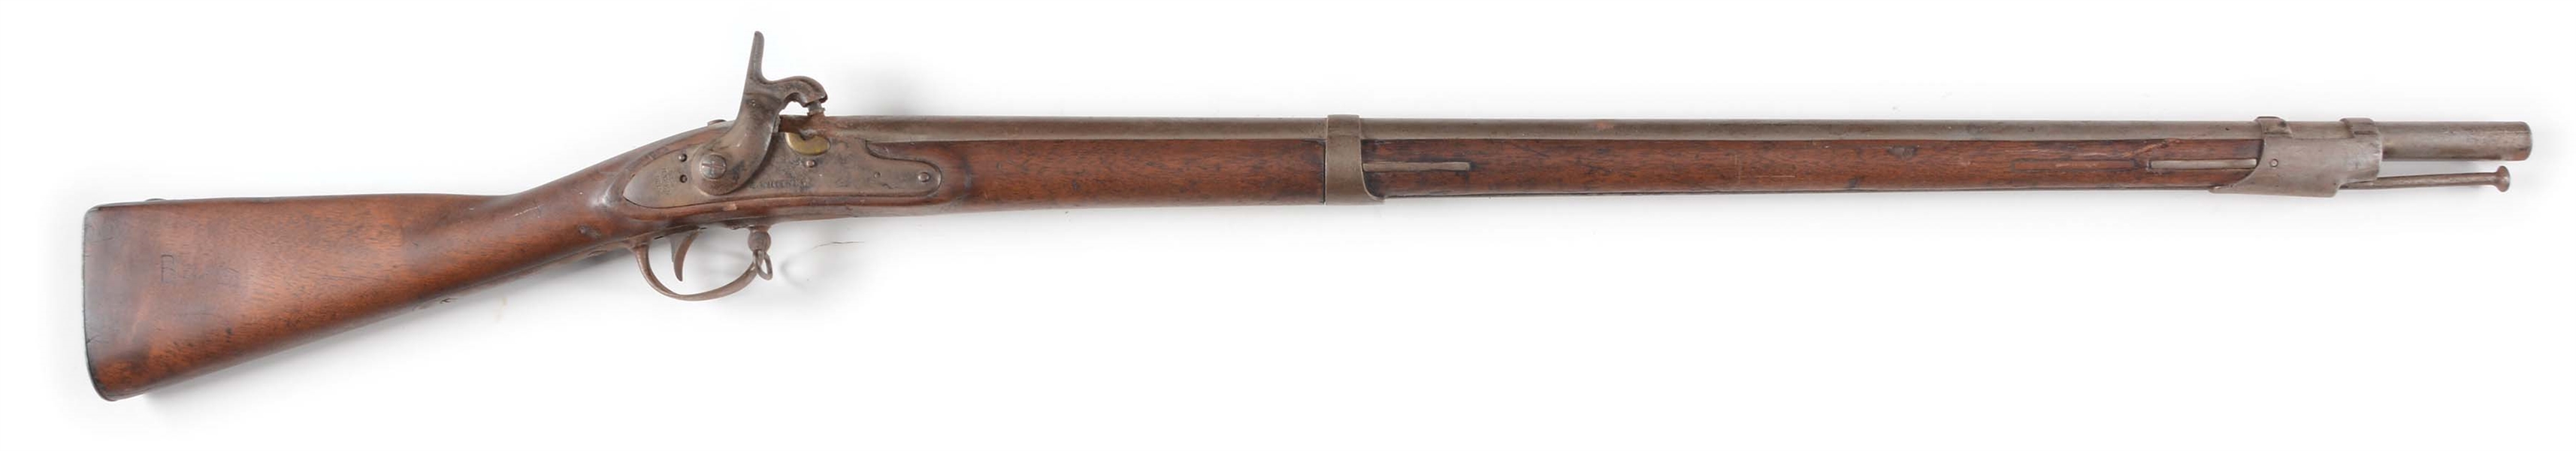 (A) ELI WHITNEY 2ND CONTRACT MODEL 1822 MUSKET ARSENAL CONVERTED TO PERCUSSION WITH FRAMED DOCUMENTATION.